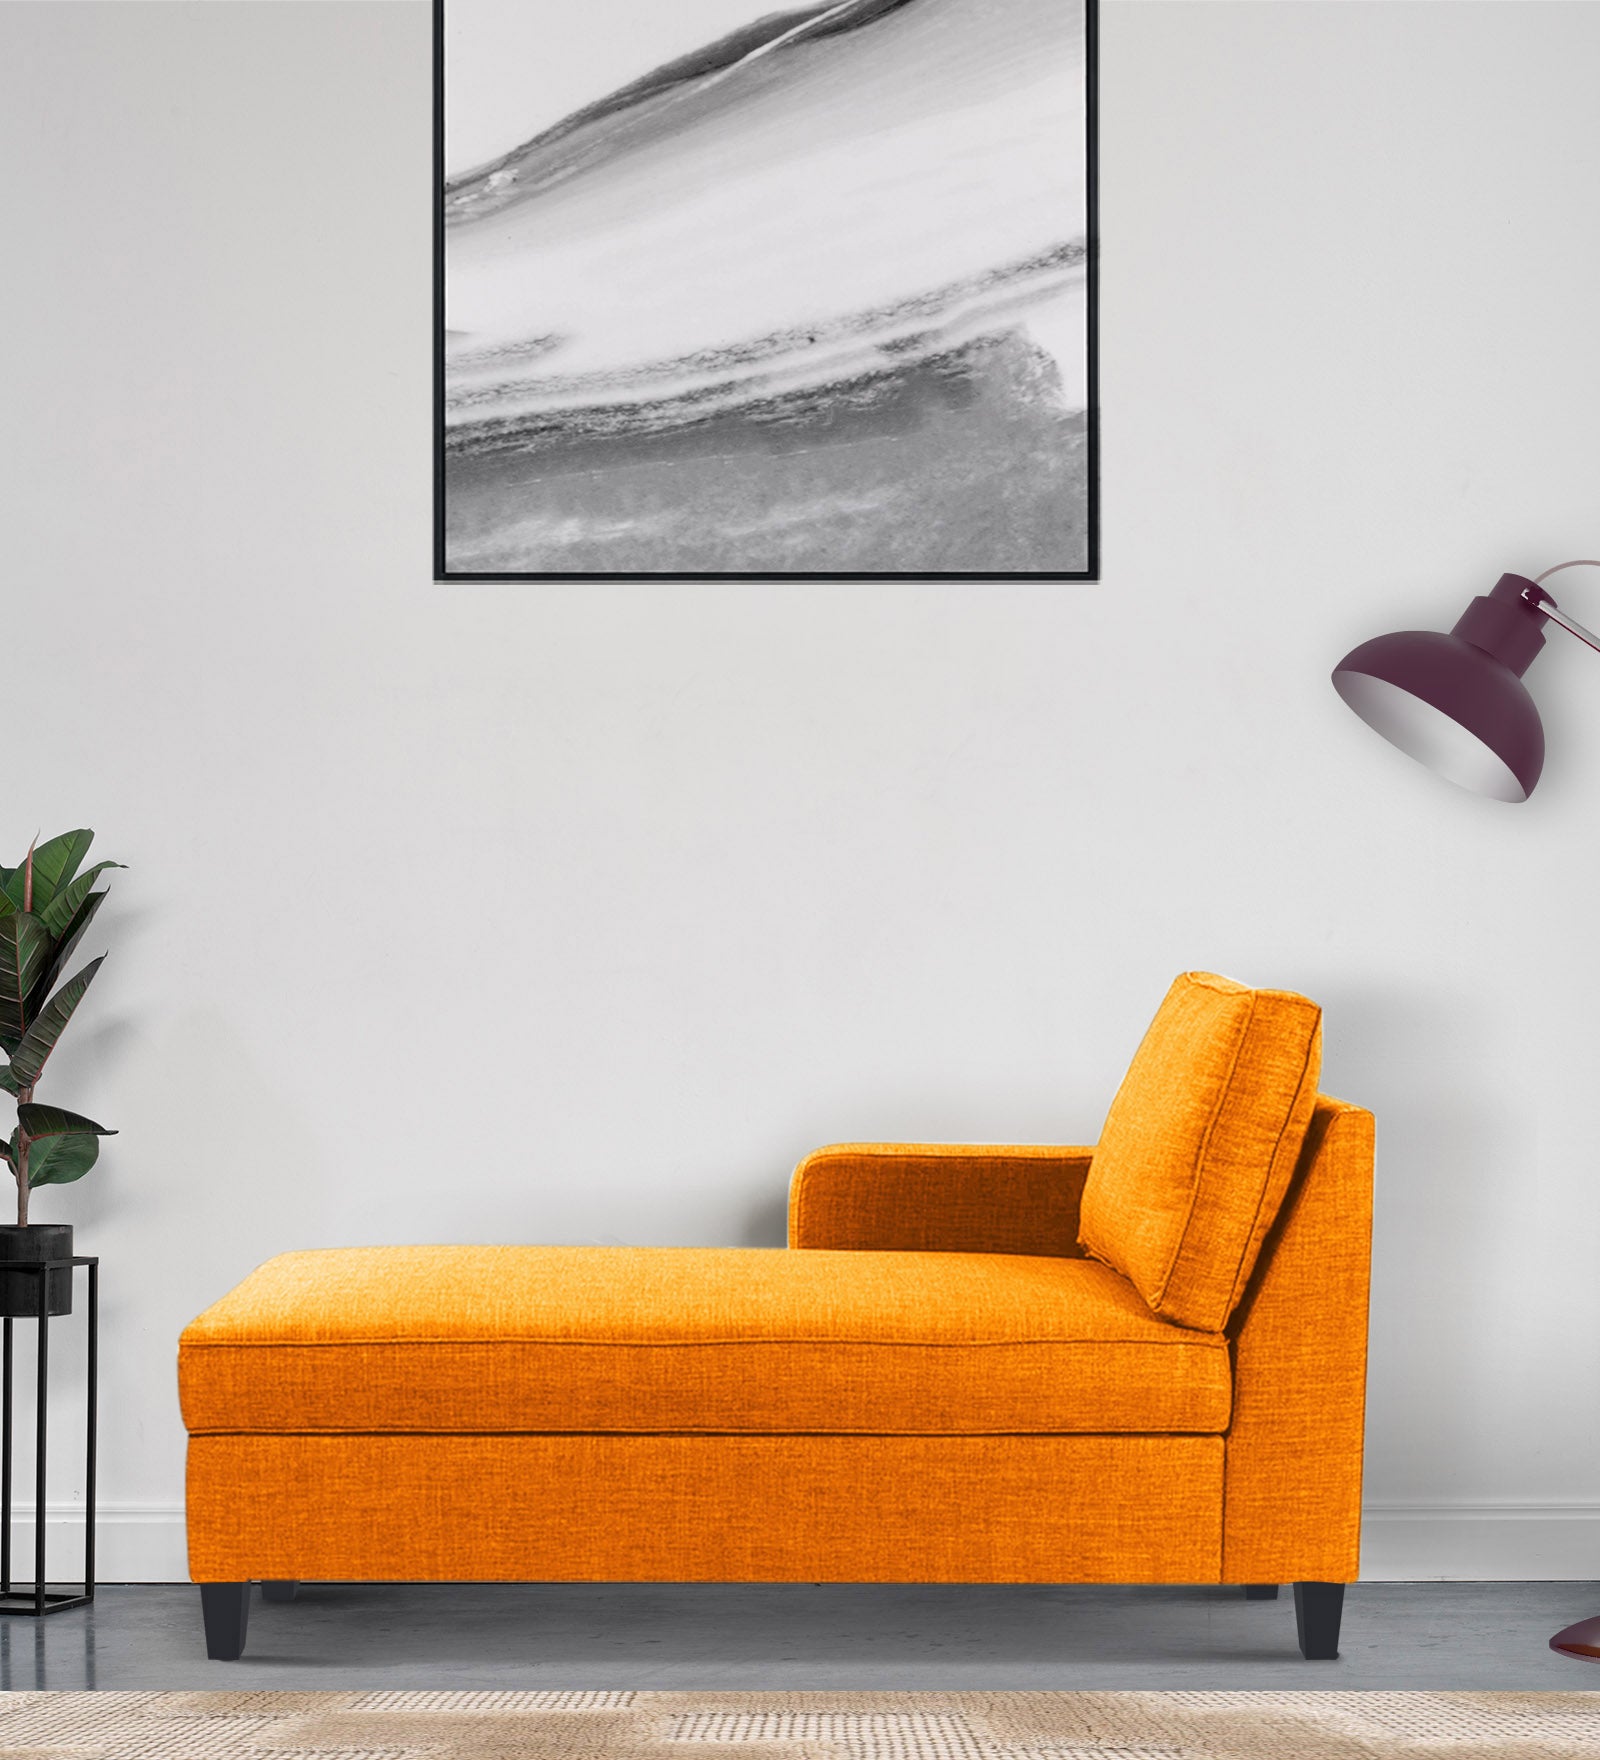 Harry Fabric LHS Chaise Lounger in Vivid Orange Colour